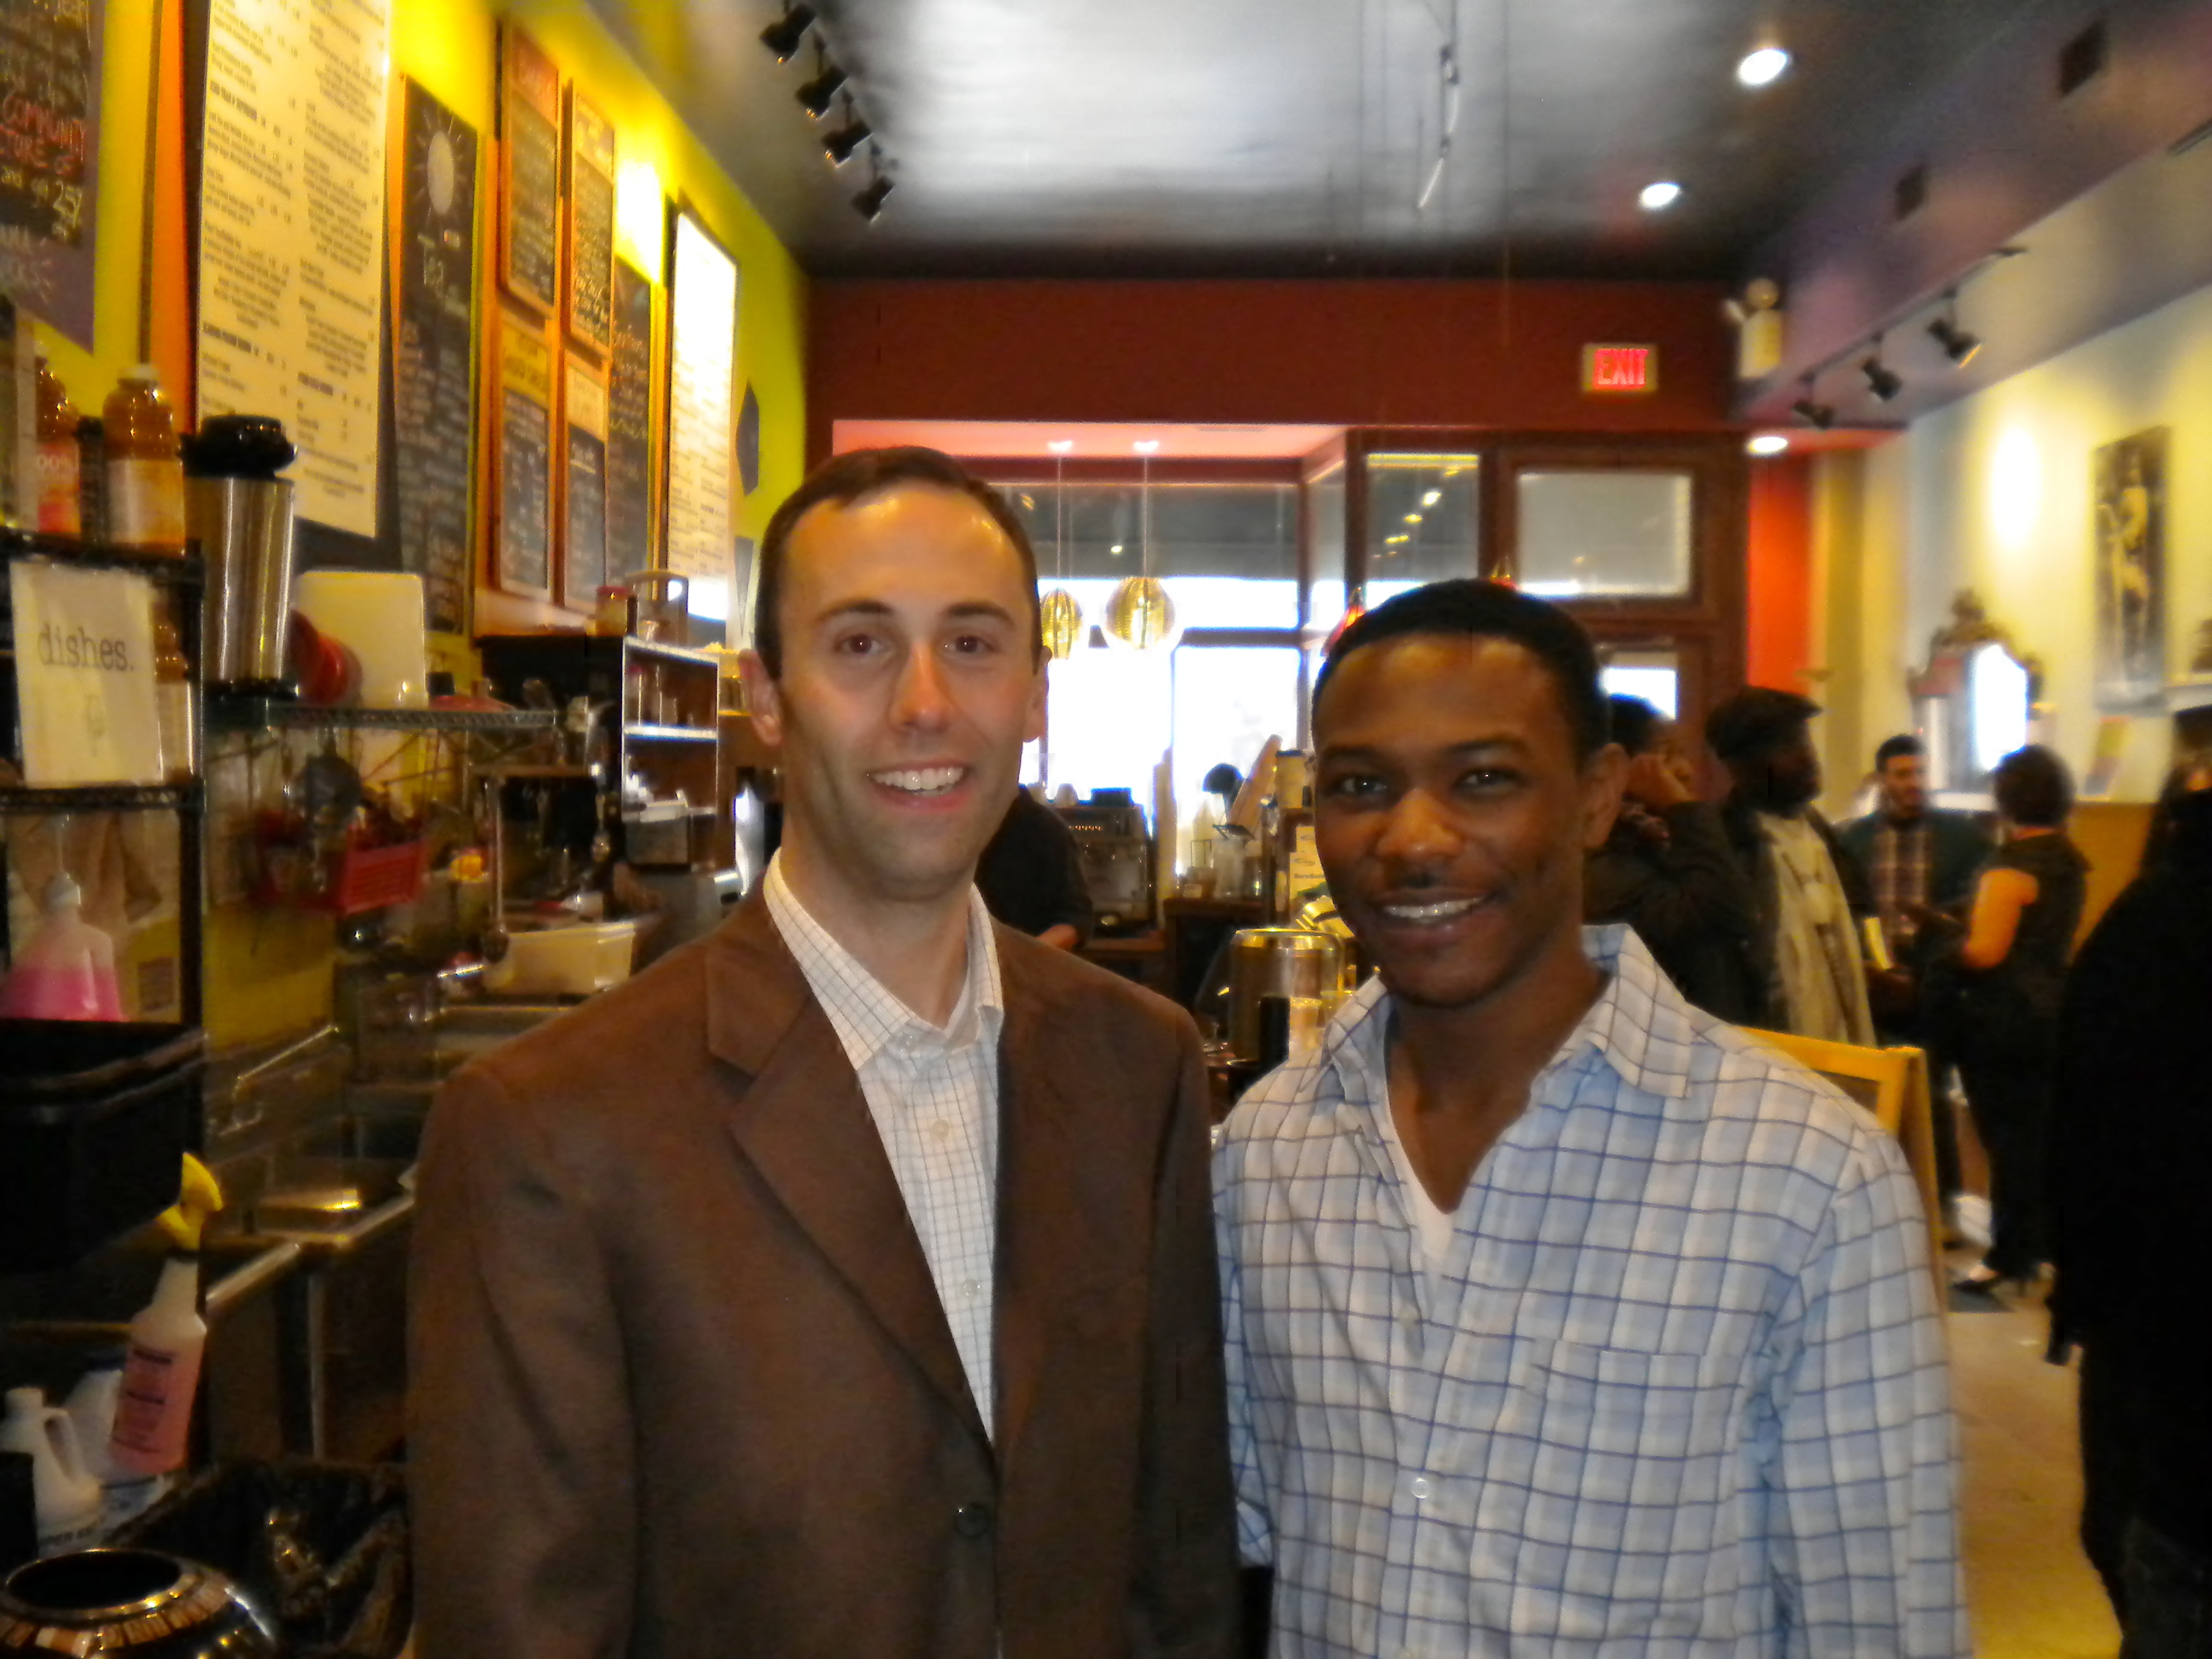 Bill Freas and Wrags Ink Publishing CEO Richard Okewole at book signing and release party for 